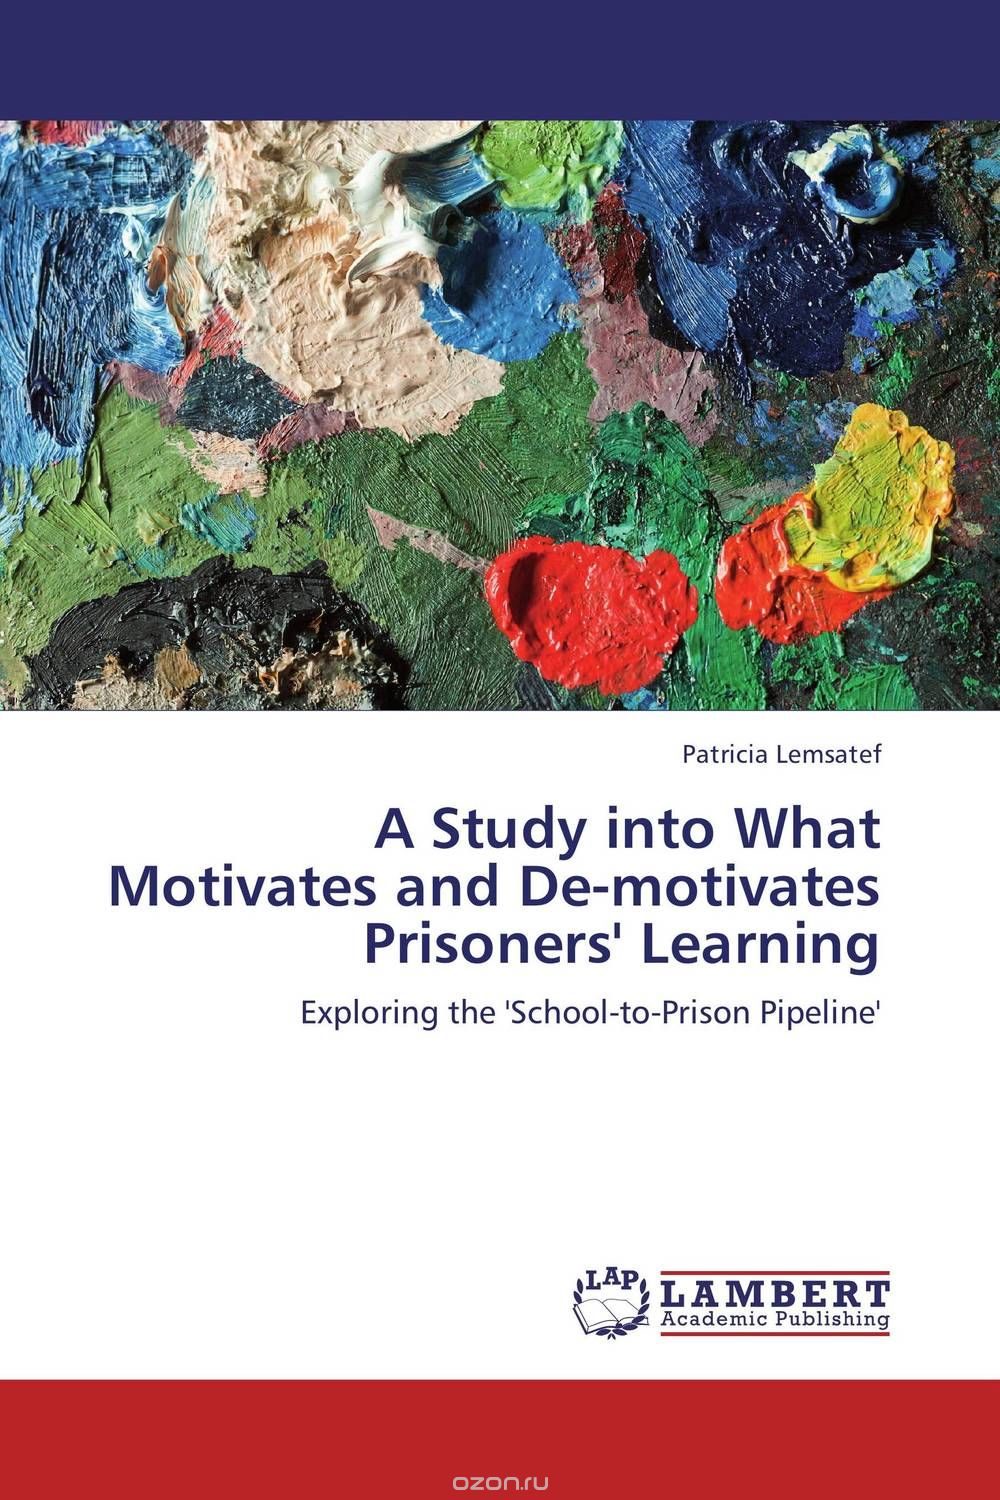 A Study into What Motivates and De-motivates Prisoners' Learning